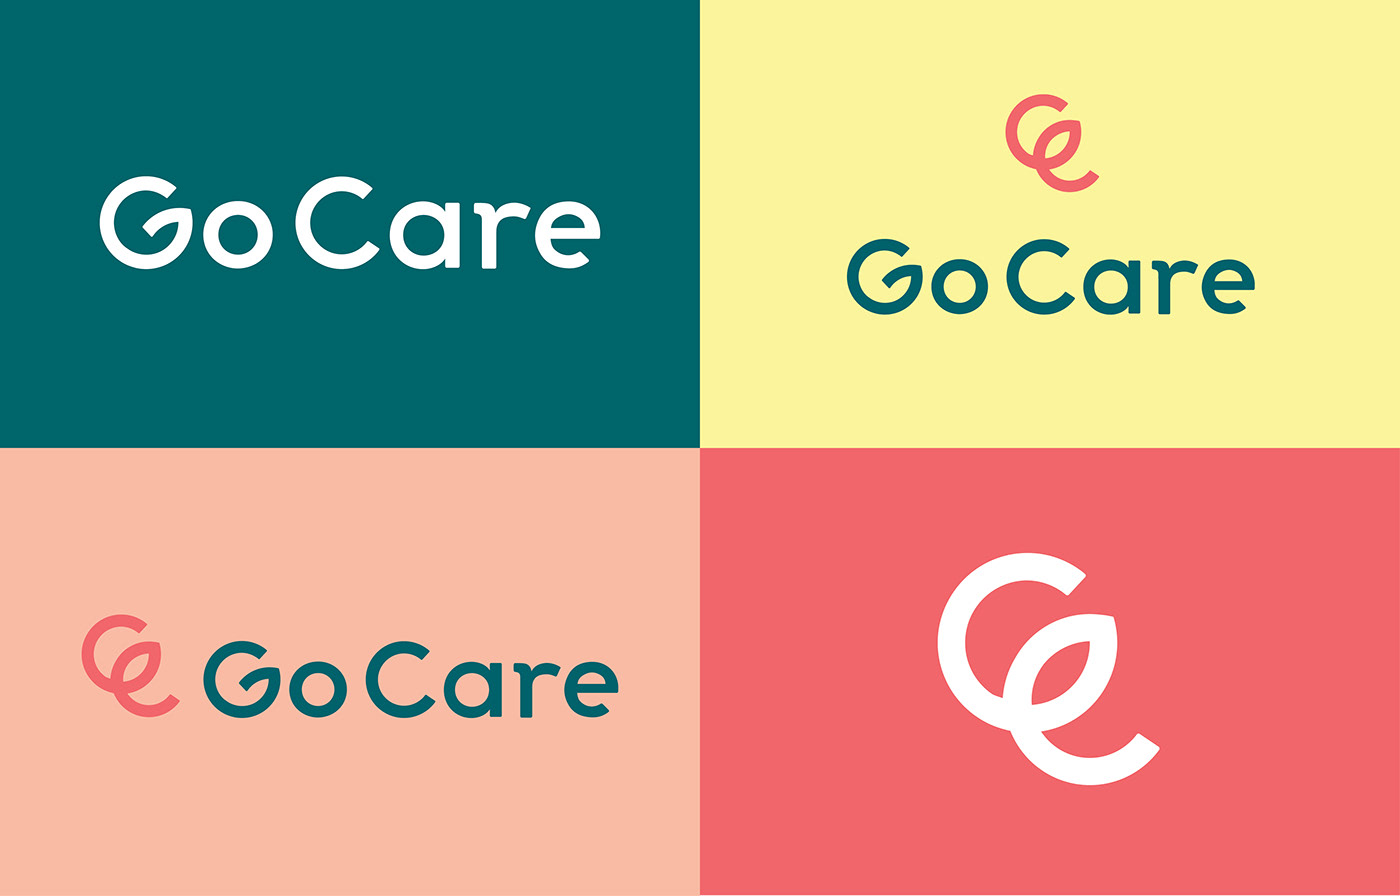 Artifact from the Discover the Vibrant Branding and Visual Identity of Go Care article on Abduzeedo